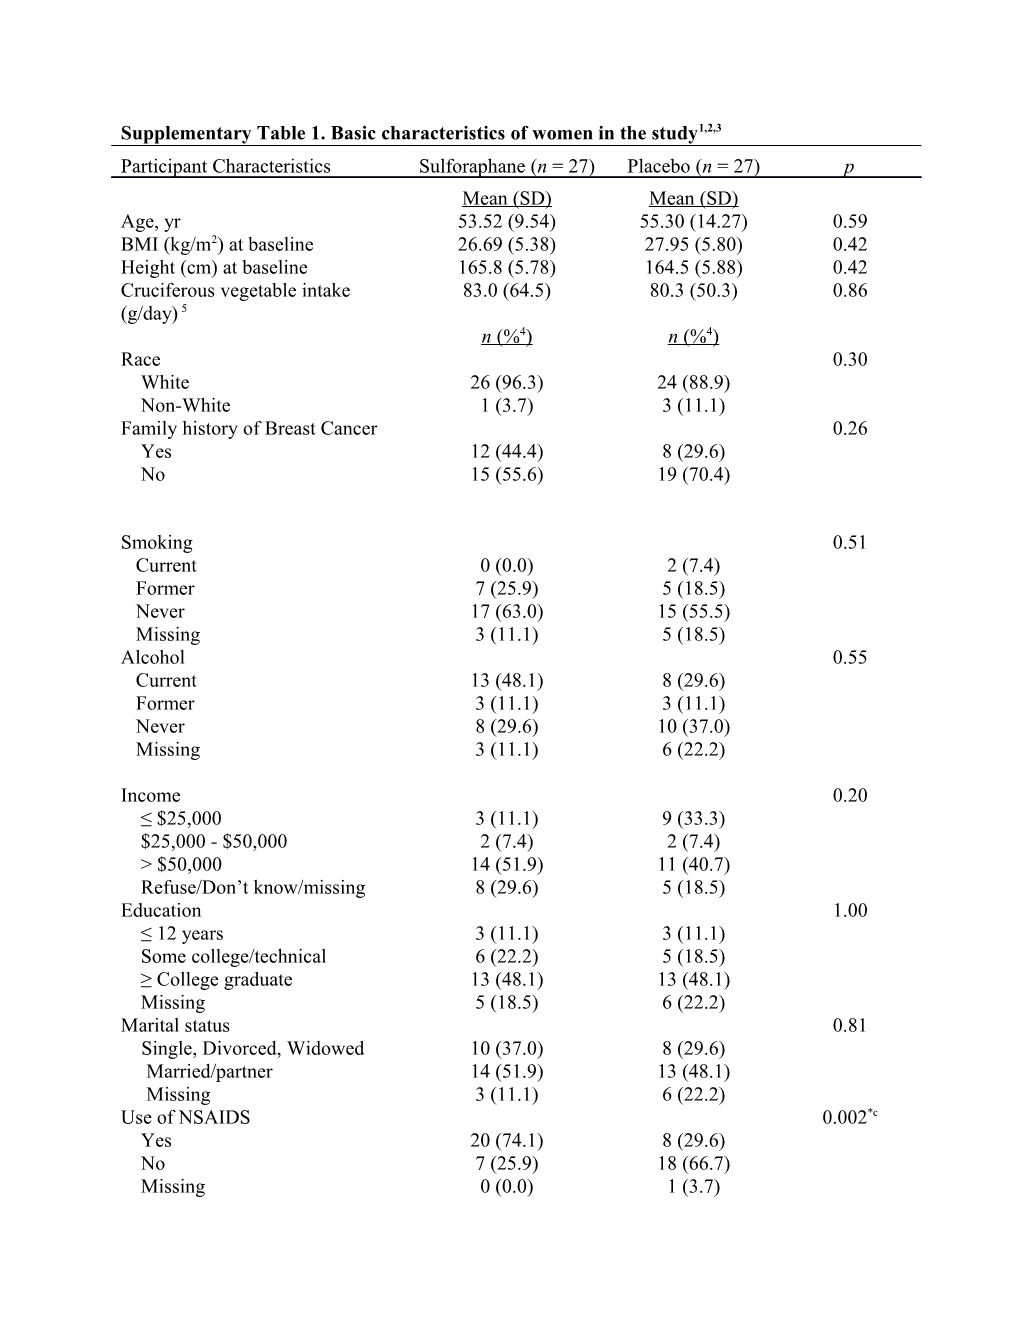 Supplementarytable 1.Basic Characteristics of Women in the Study1,2,3